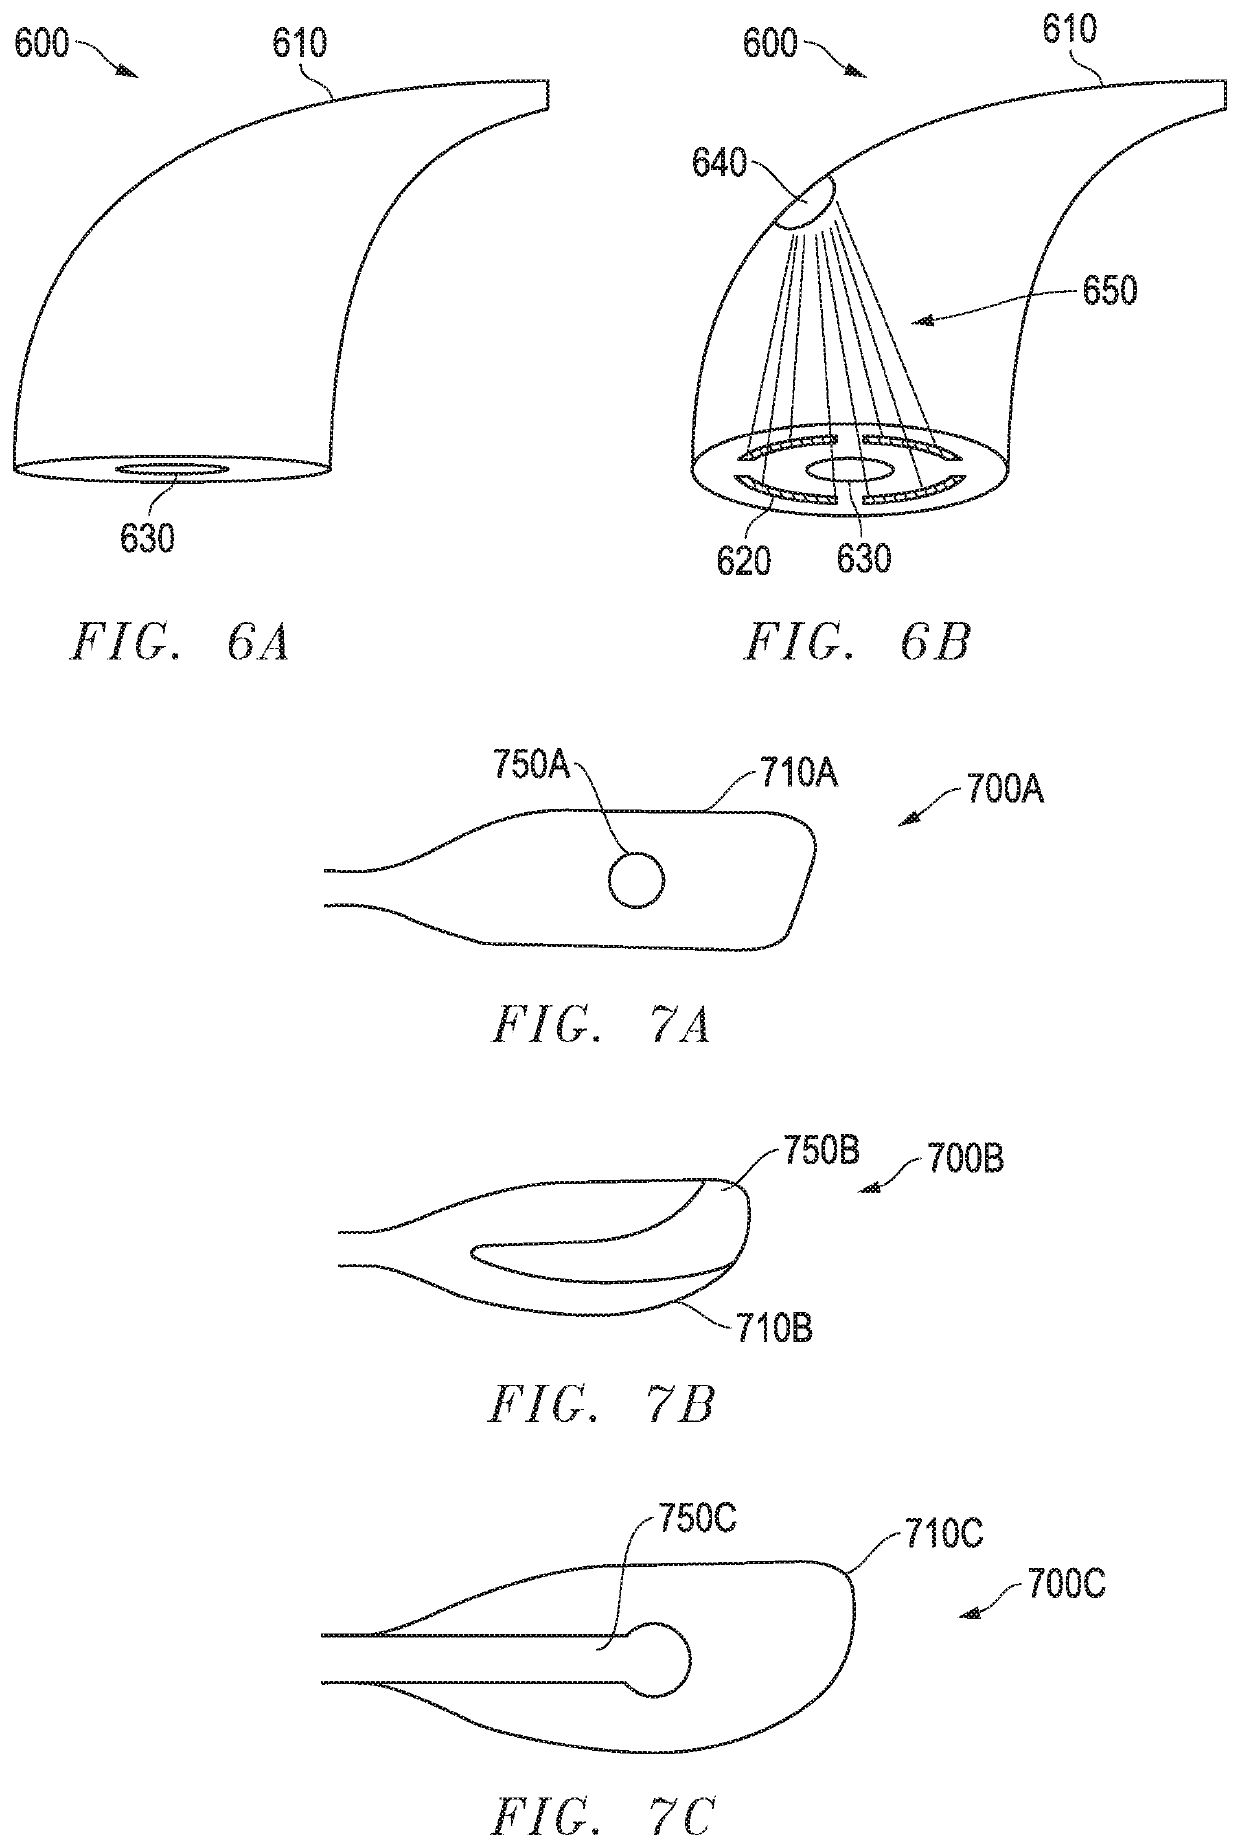 Rear view device assemblies and circuits